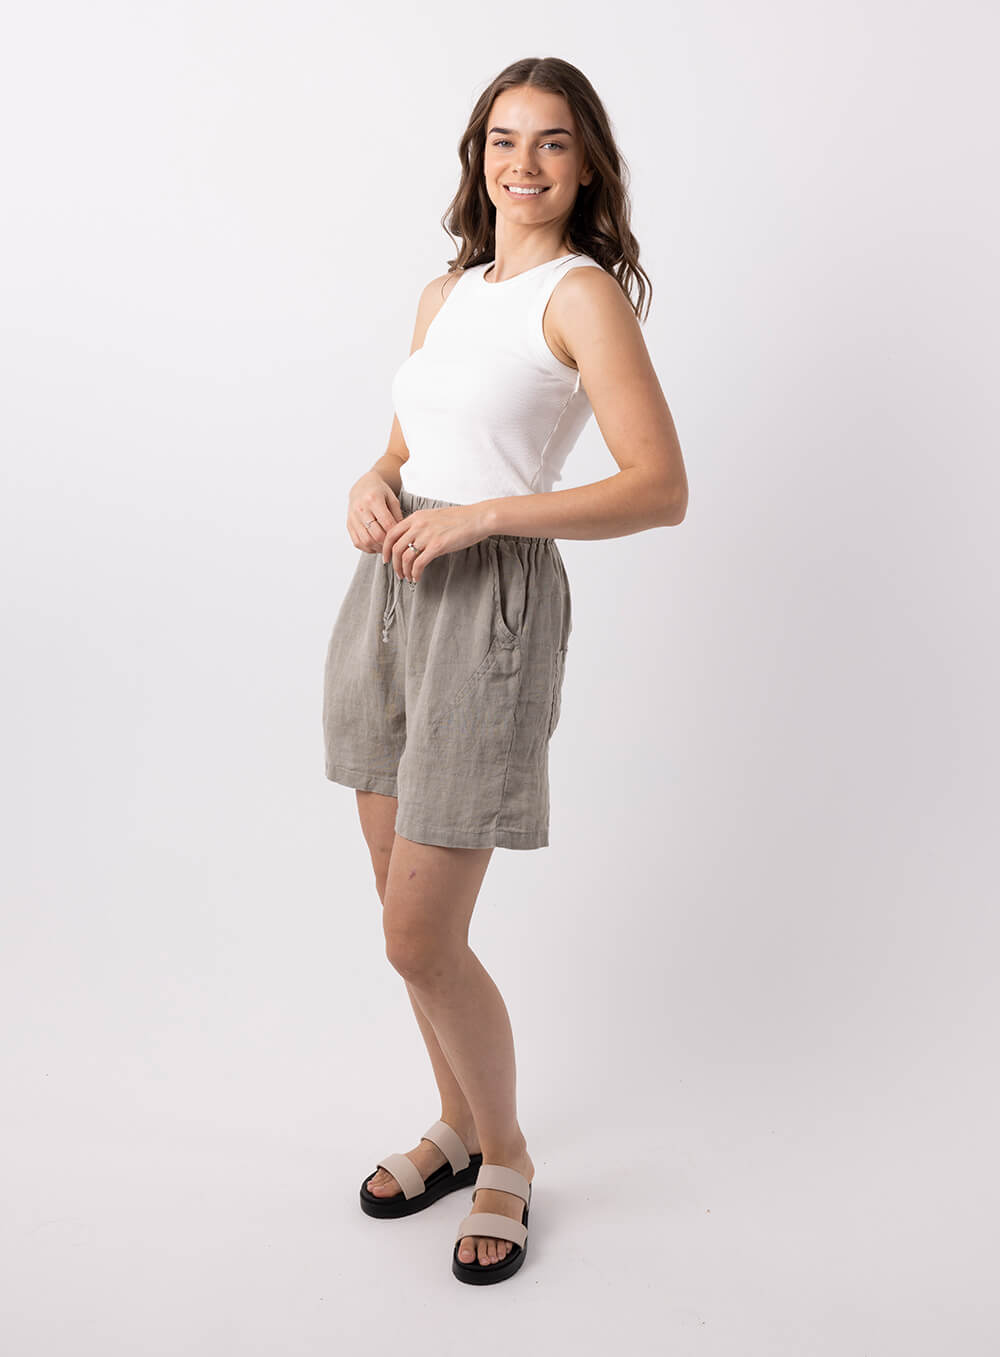 Adeline linen short in sage has 20mm elestic wiast band with tie. It has 2 side pockets, is mid thigh length with 100% breathabe linen fabric.. 